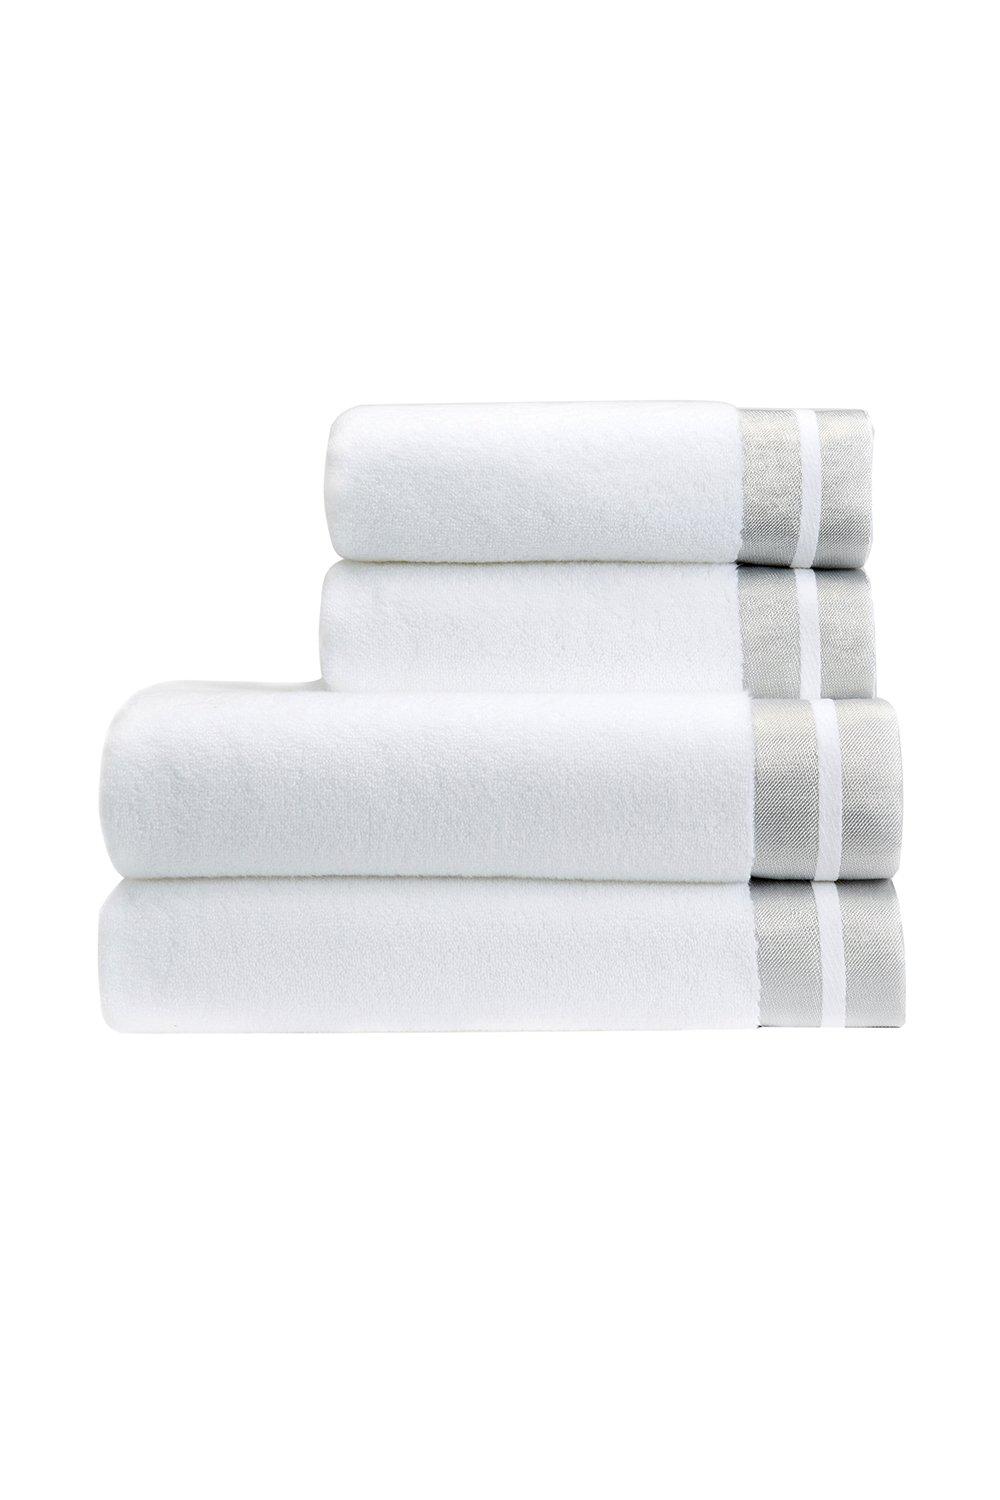 Christy - Mode Towel - White/Silver - Hand Towel